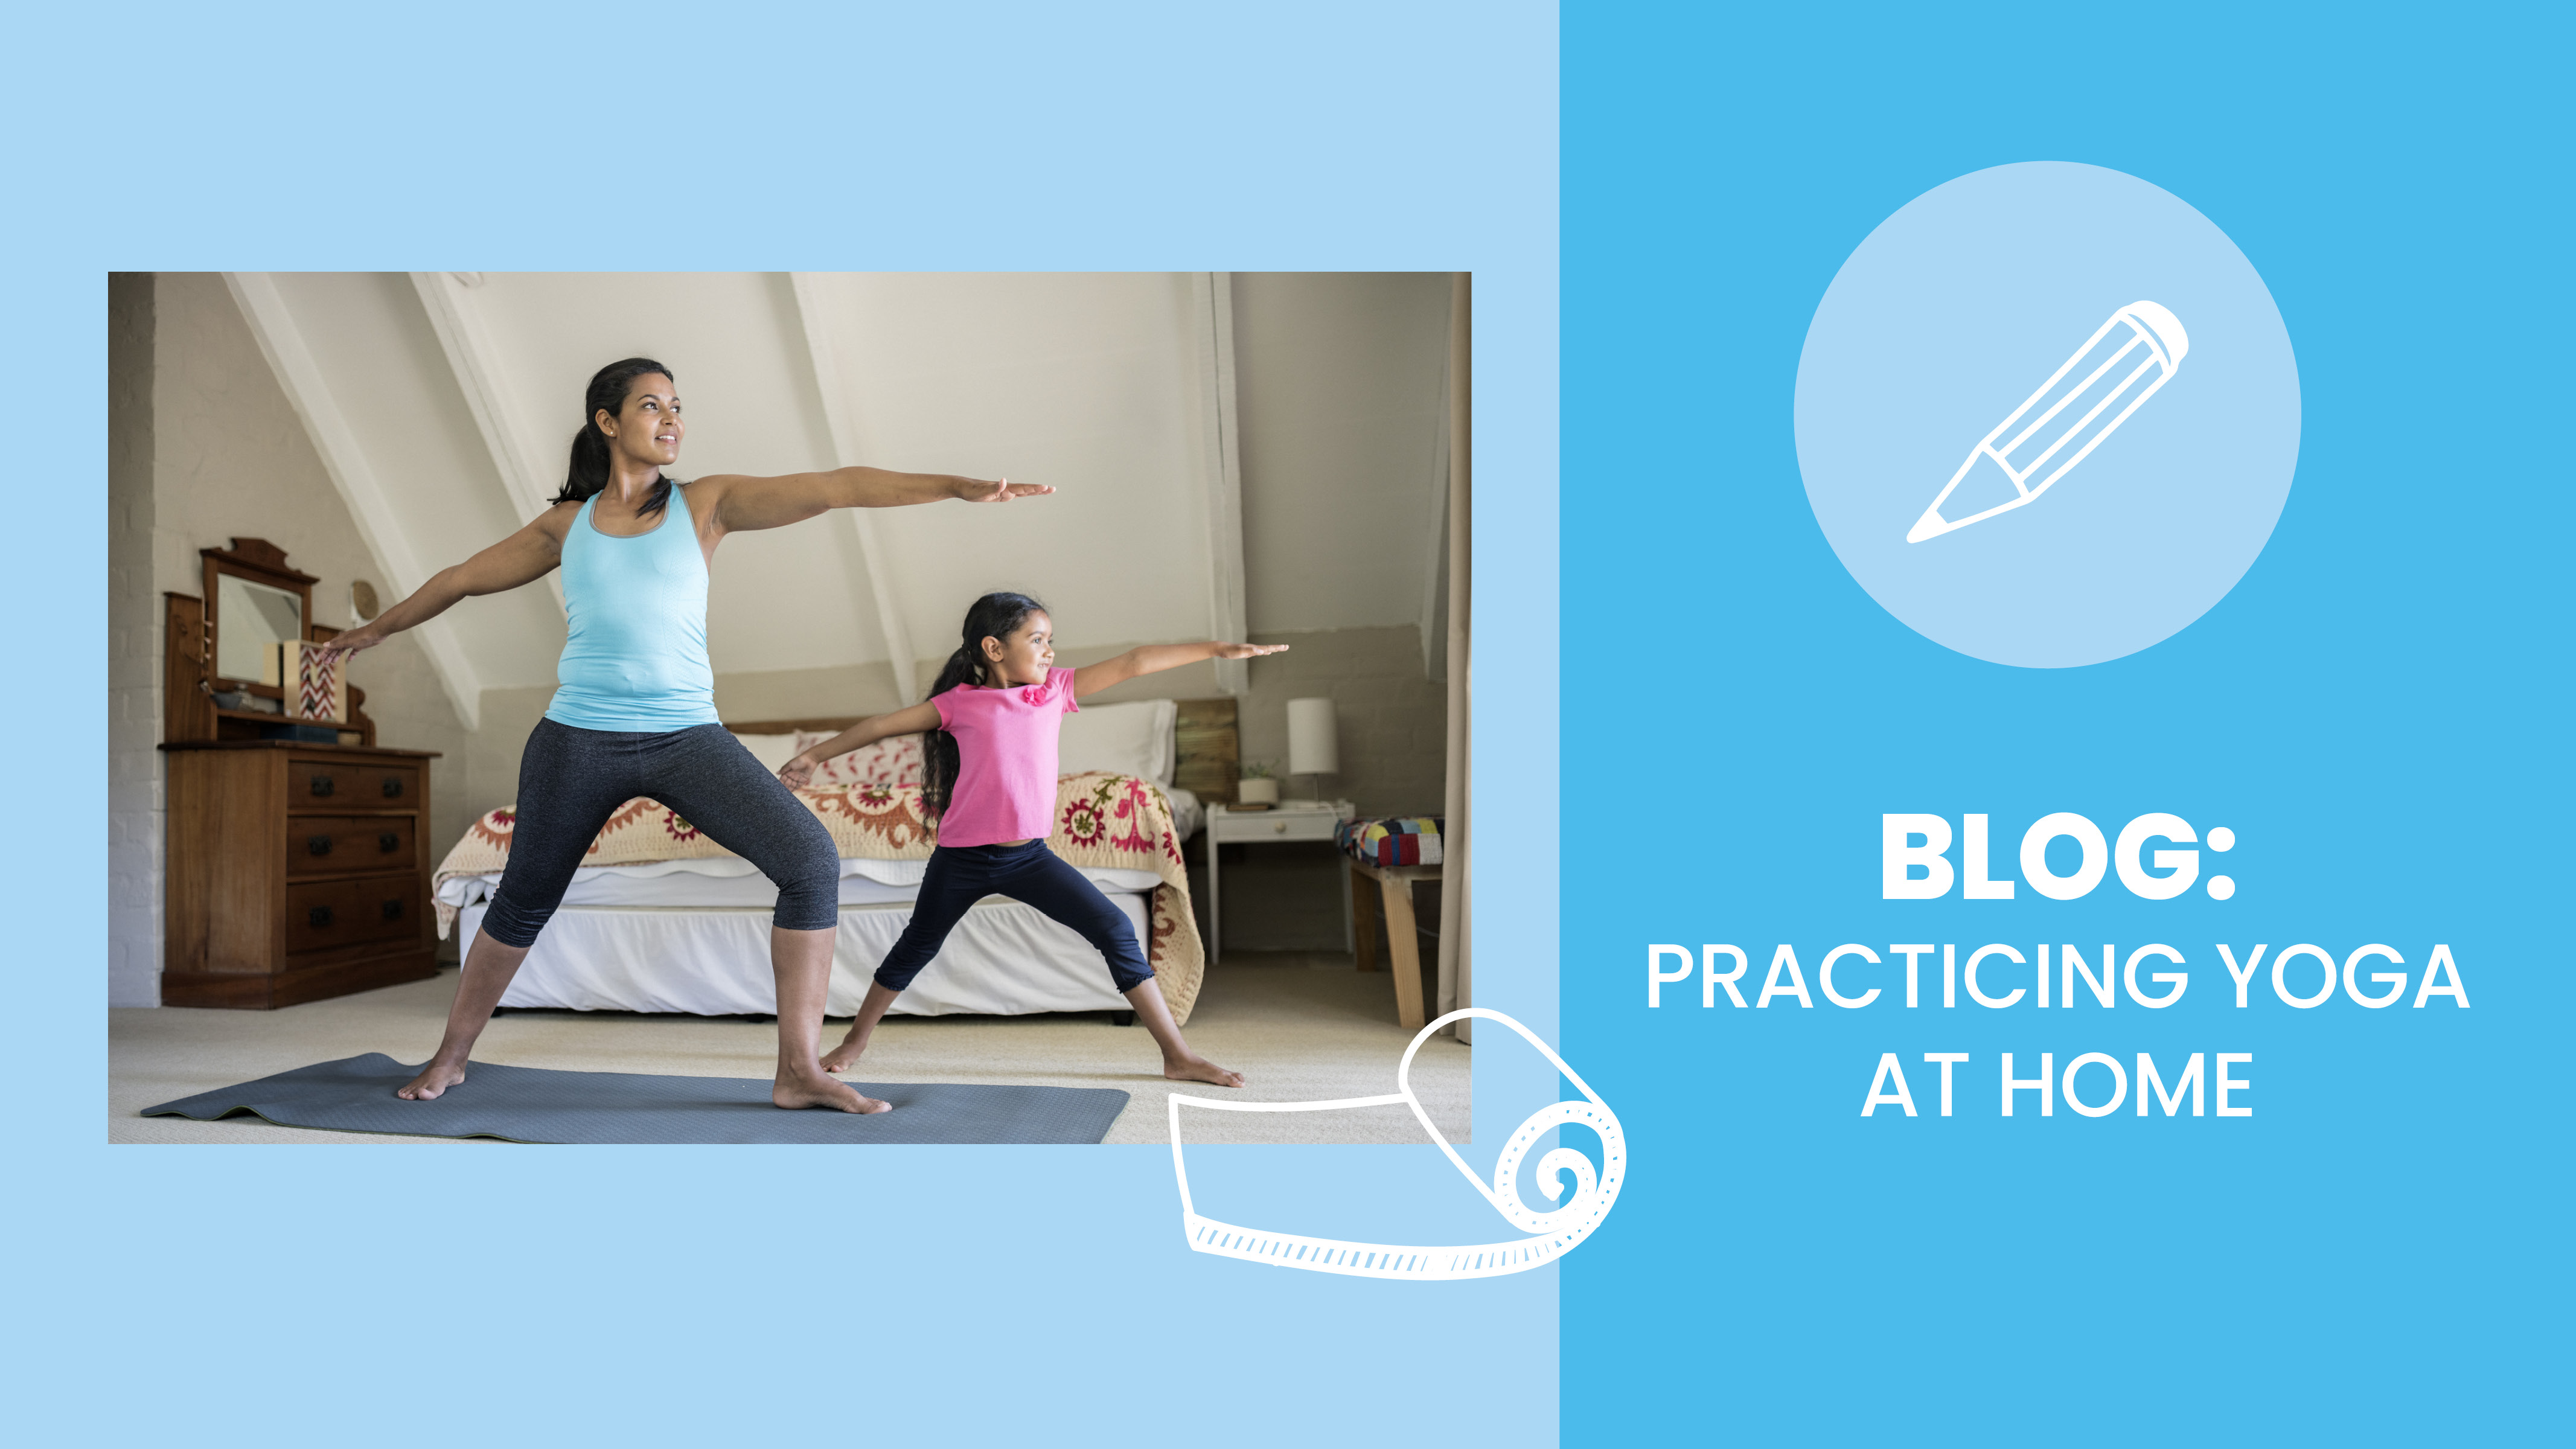 Adult female and child practicing yoga on mats - Sanford fit